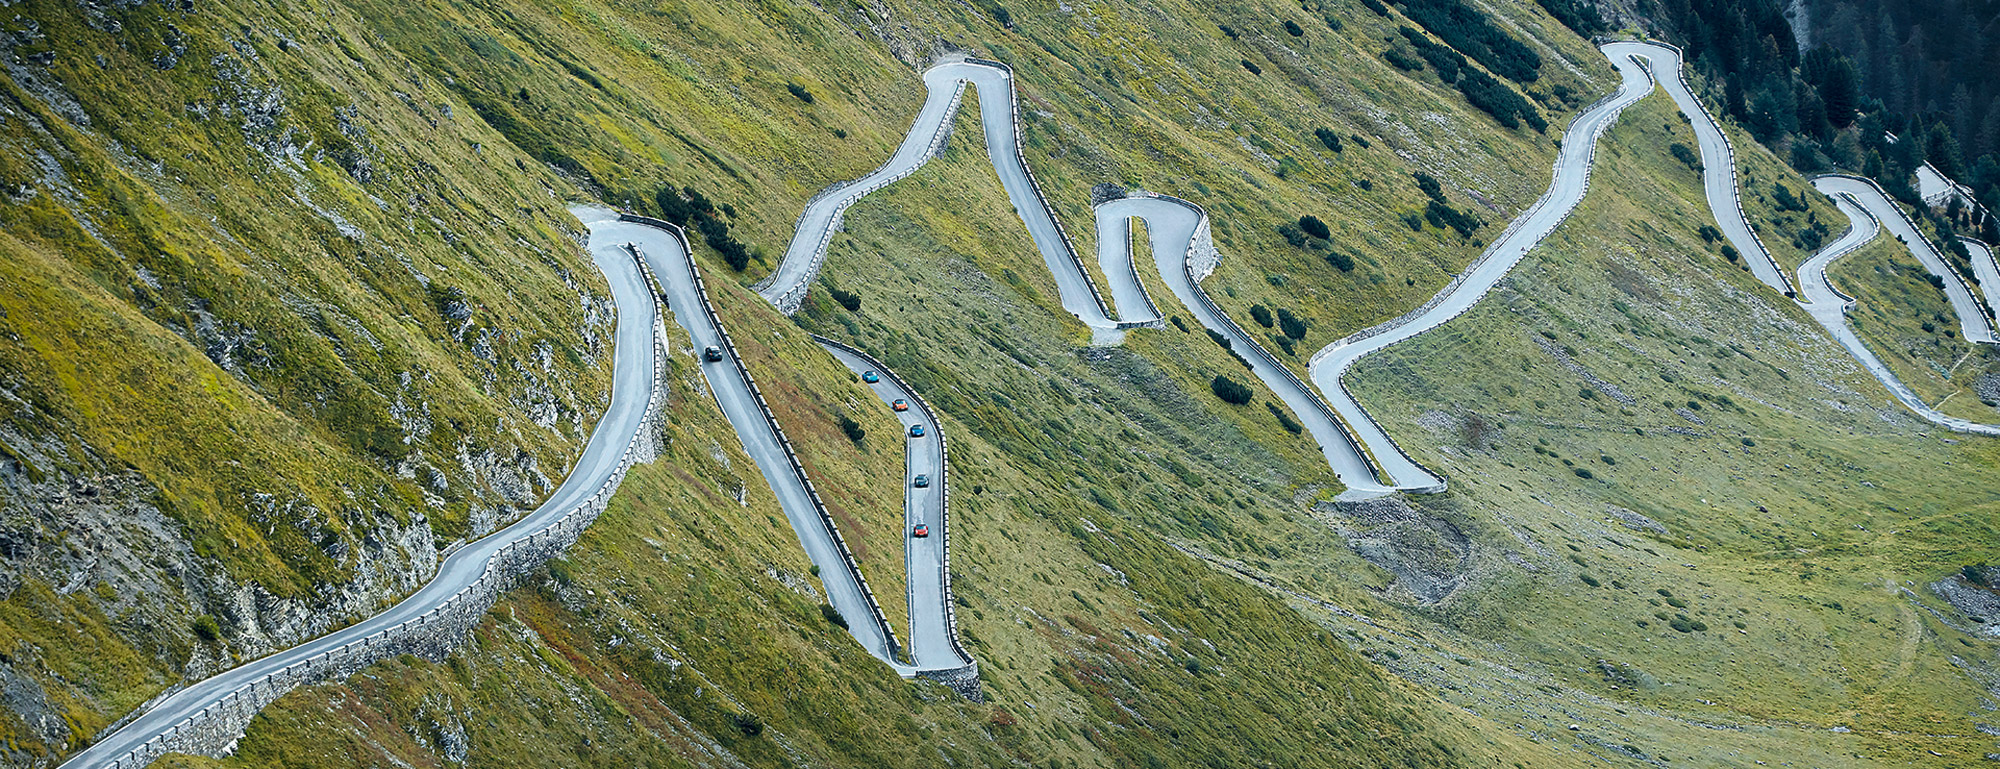 Lots of hairpin bends weaving up a mountain